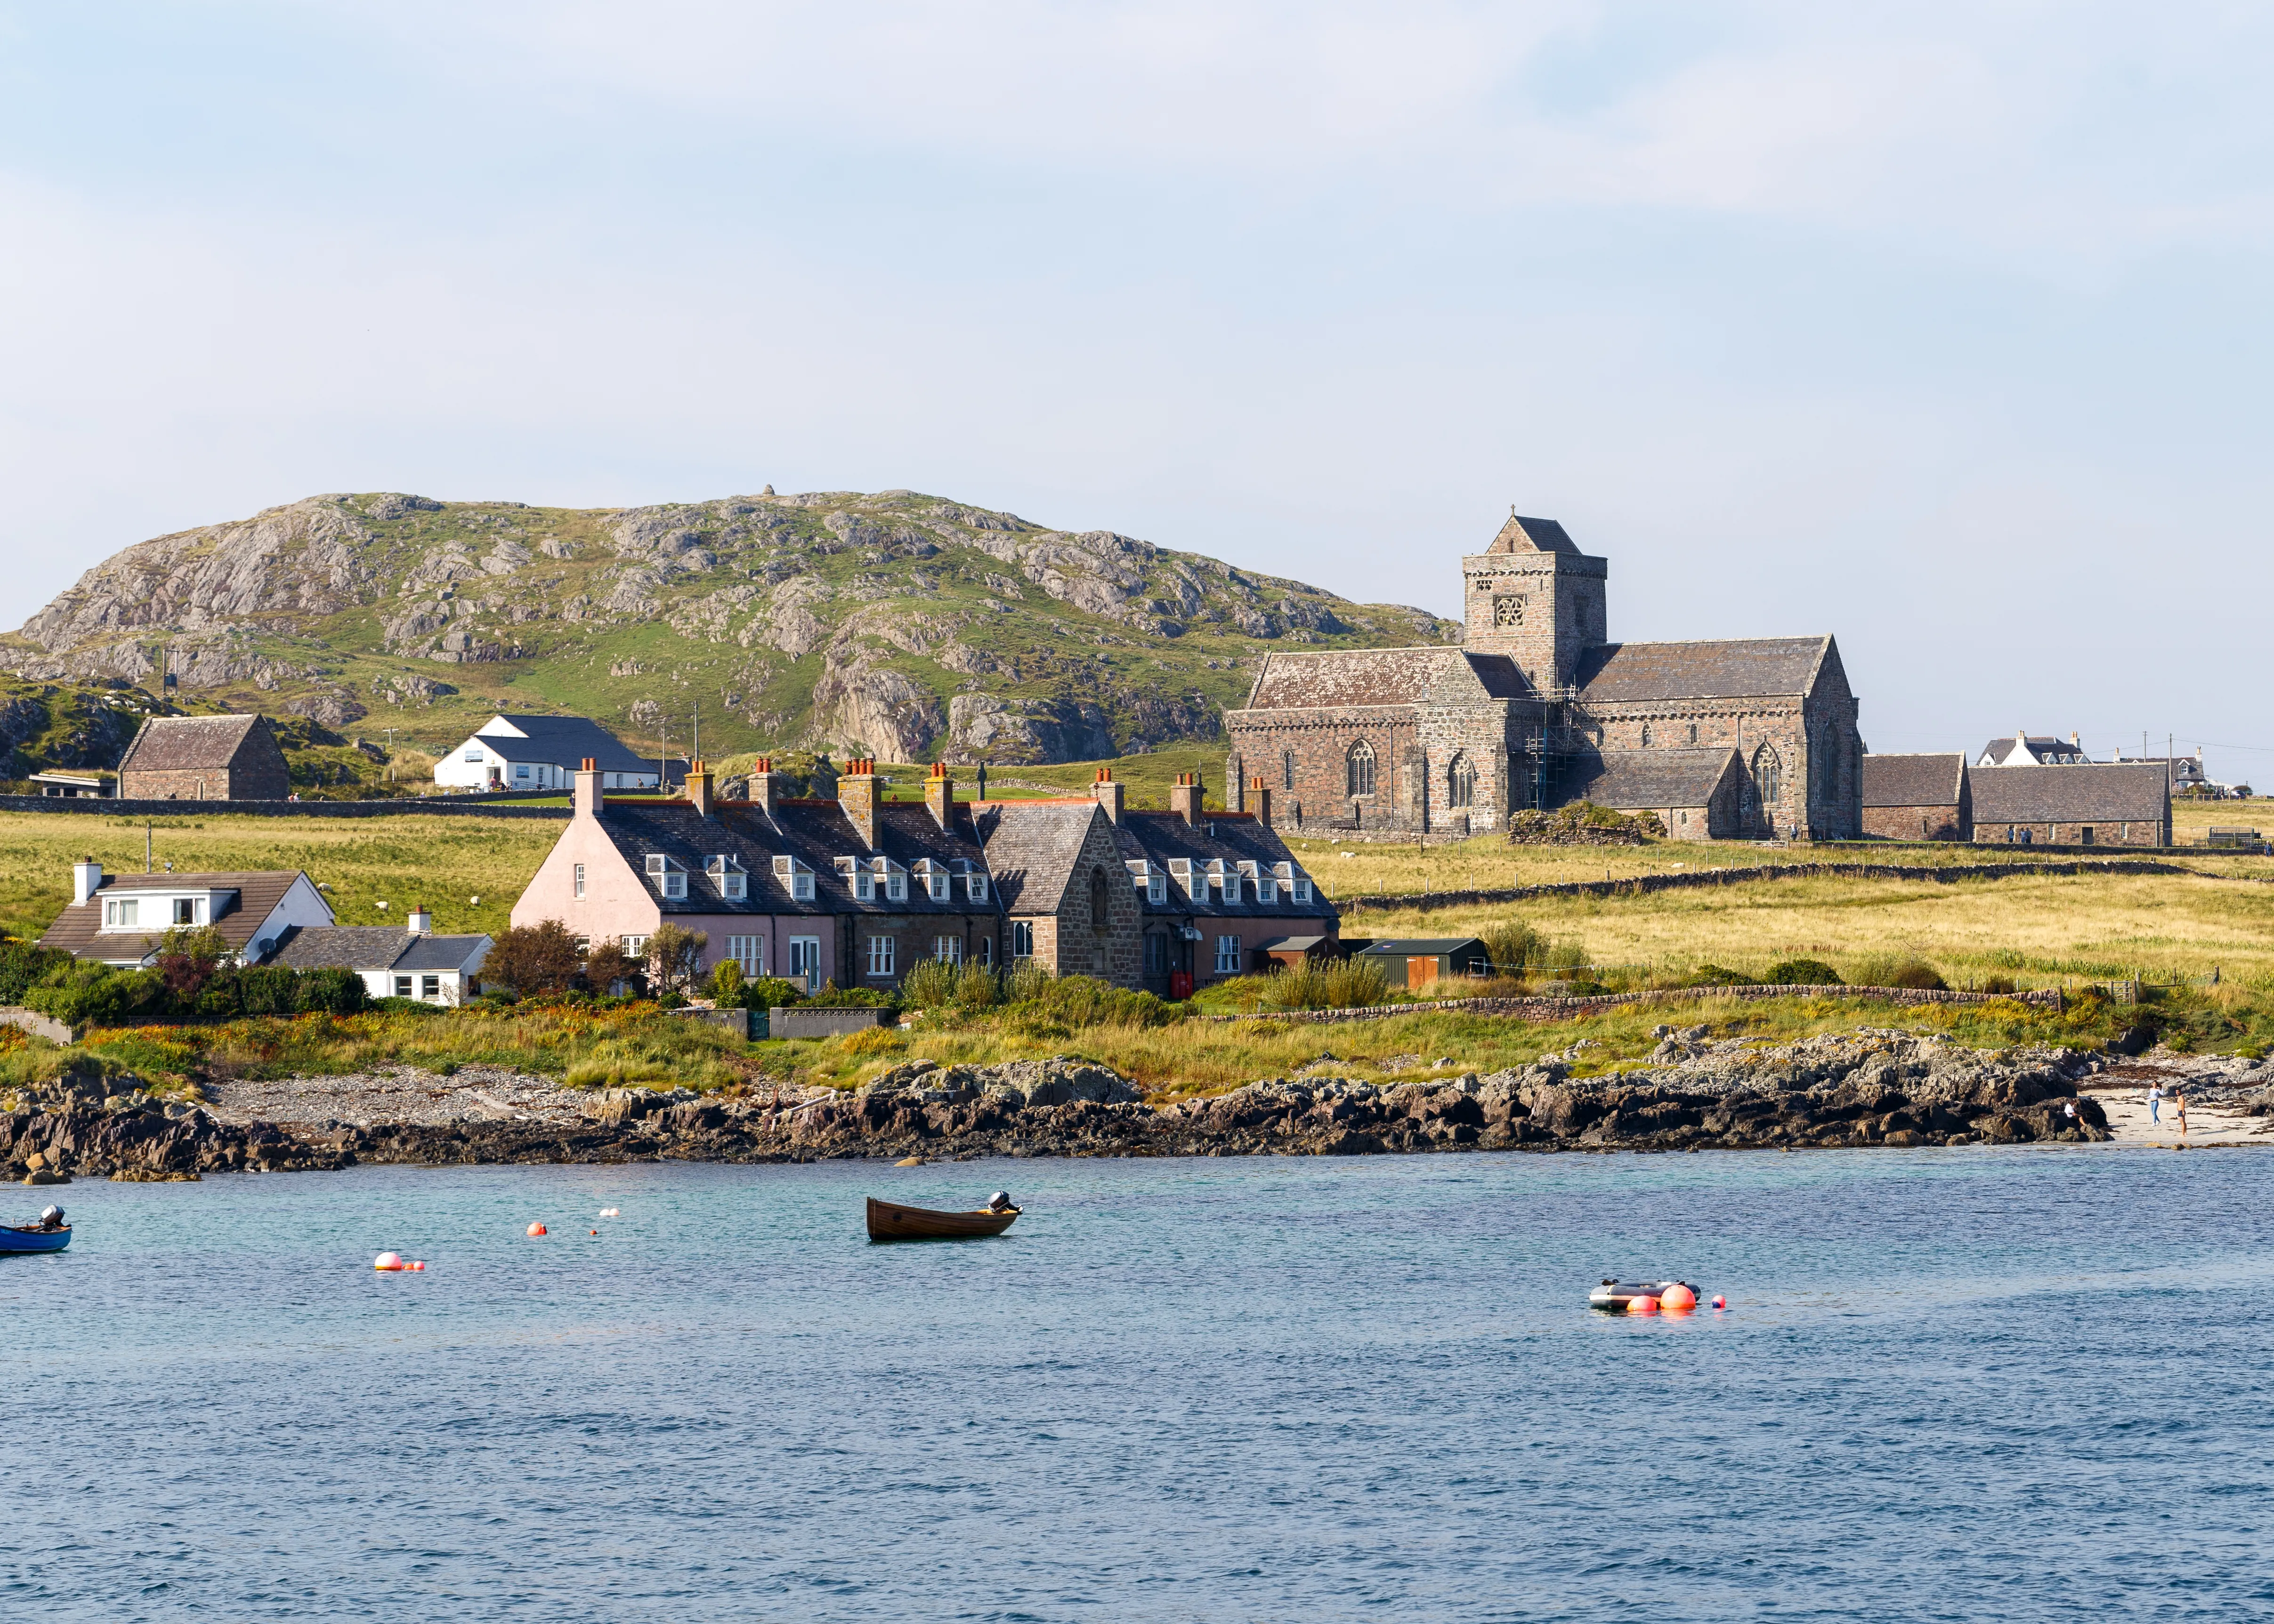 Iona Abbey and nunnery, established 563 AD on the site of the monastery founded by St. Colmcille, also known as Columba.?w=200&h=150